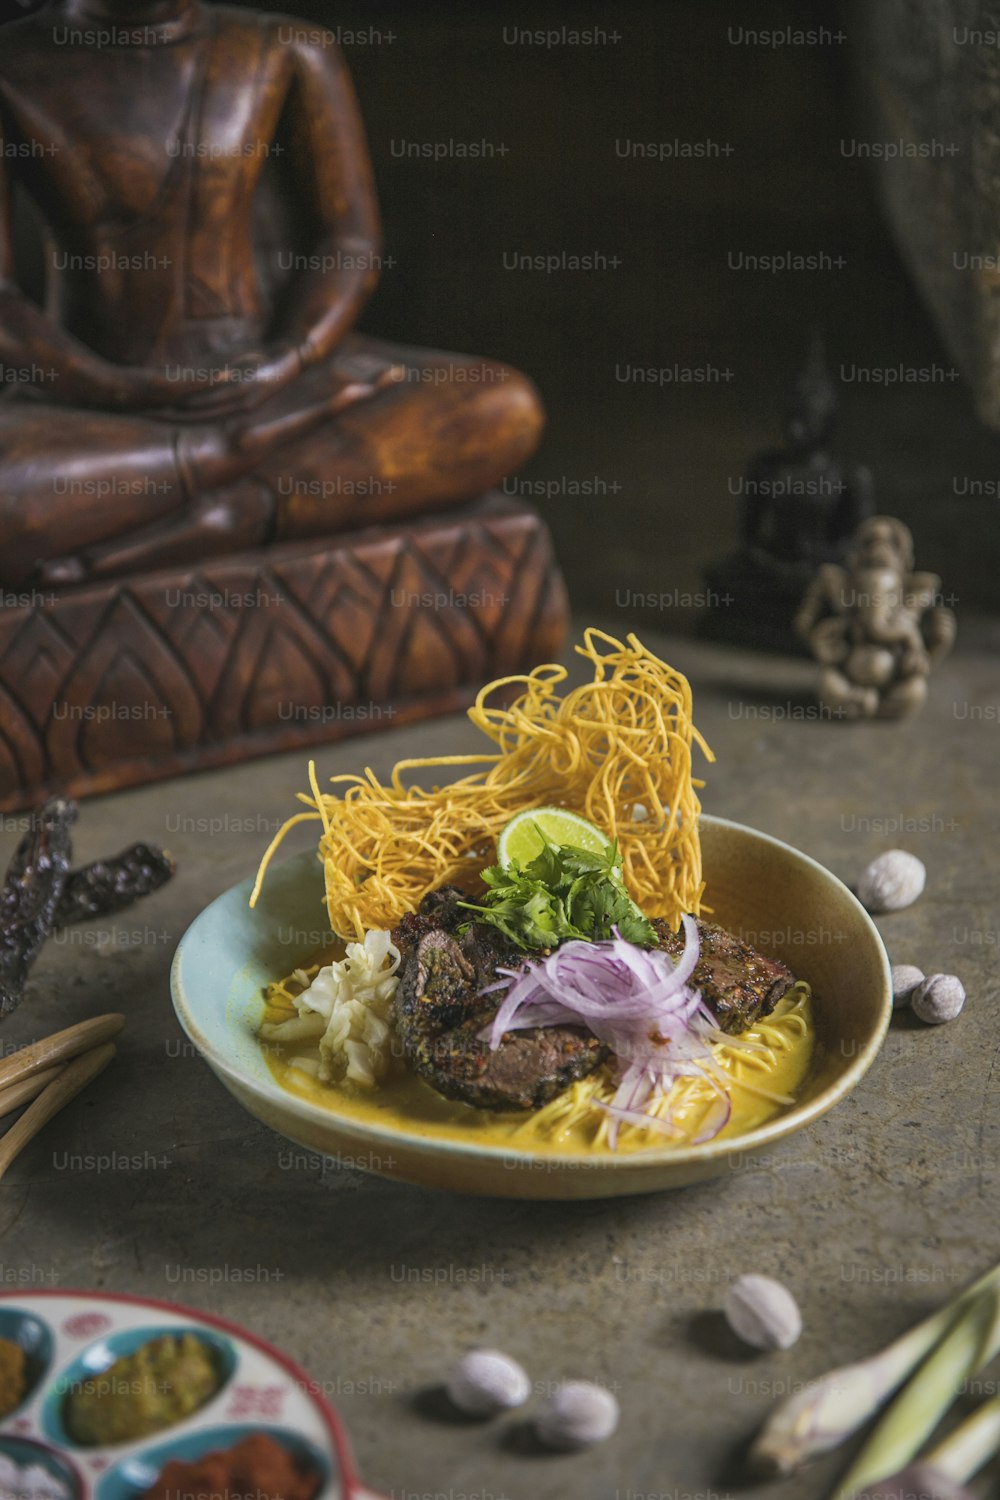 a plate of food with noodles and meat